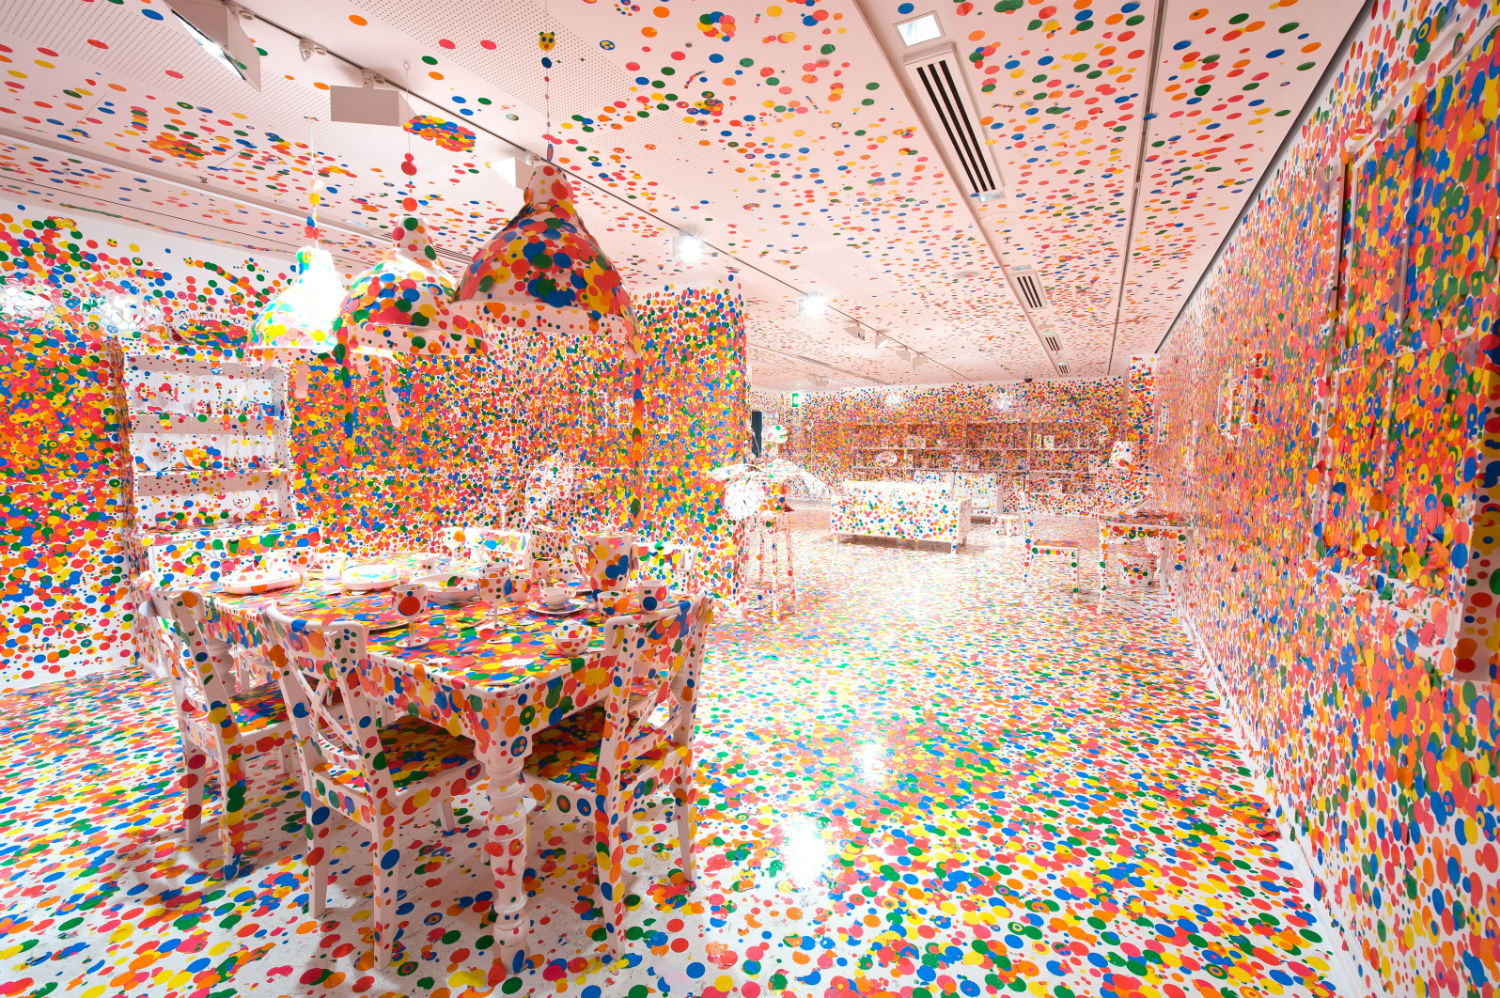 "The Obliteration Room" Collaboration between Yayoi Kusama and Queensland Art Gallery. Photography by QAGOMA Photography. 2002 to present.